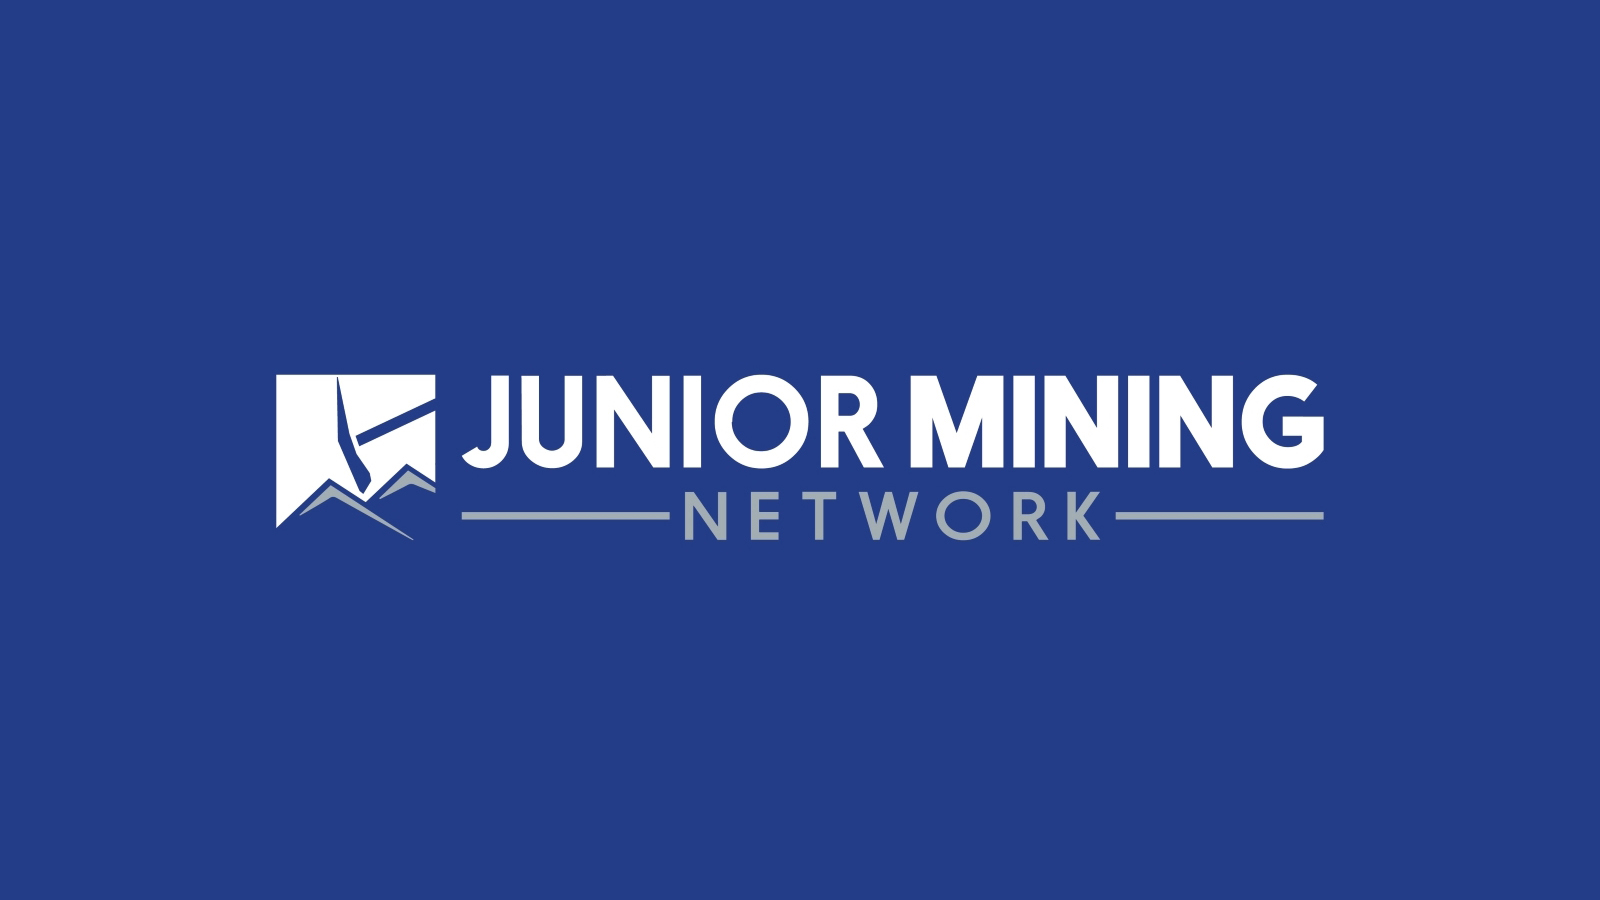 Pure Energy Minerals News And Stock Quote Tsx V Pe Junior Mining Network